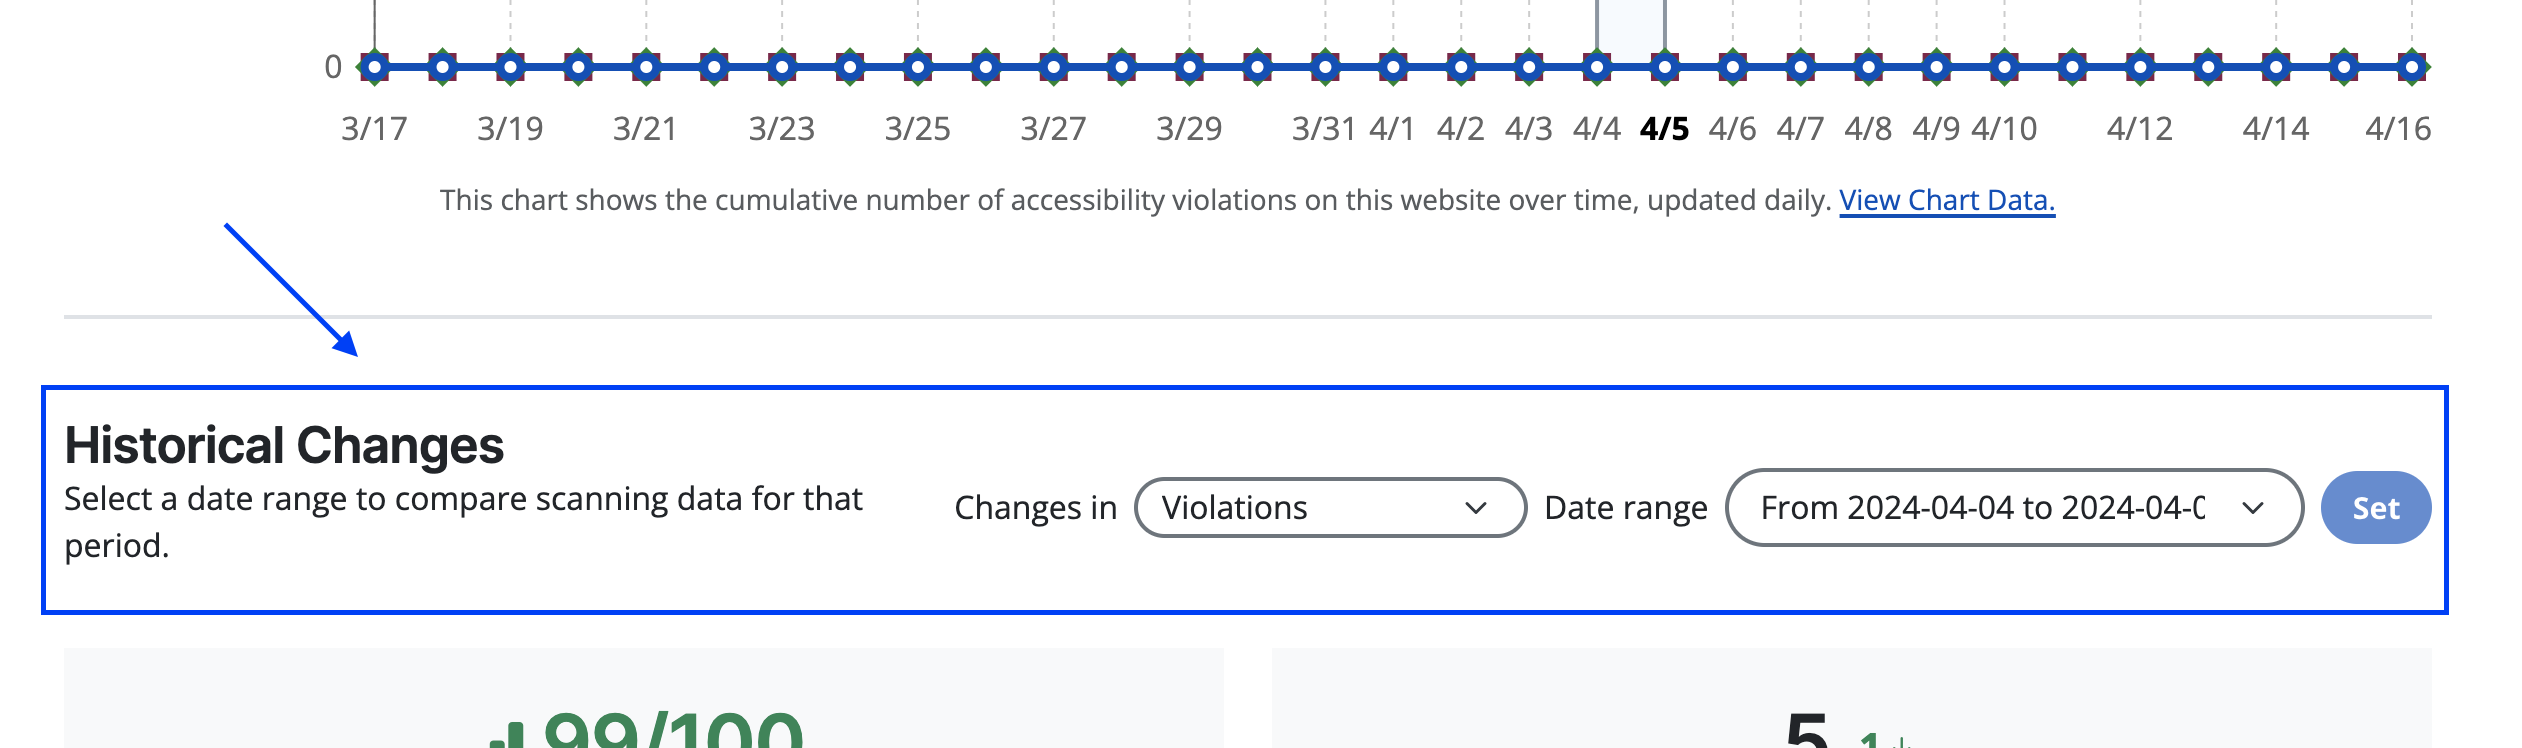 A section on the Automated History page in RAMP. It is titled "Historical Changes" and there is an option to select the type of changes and date range.